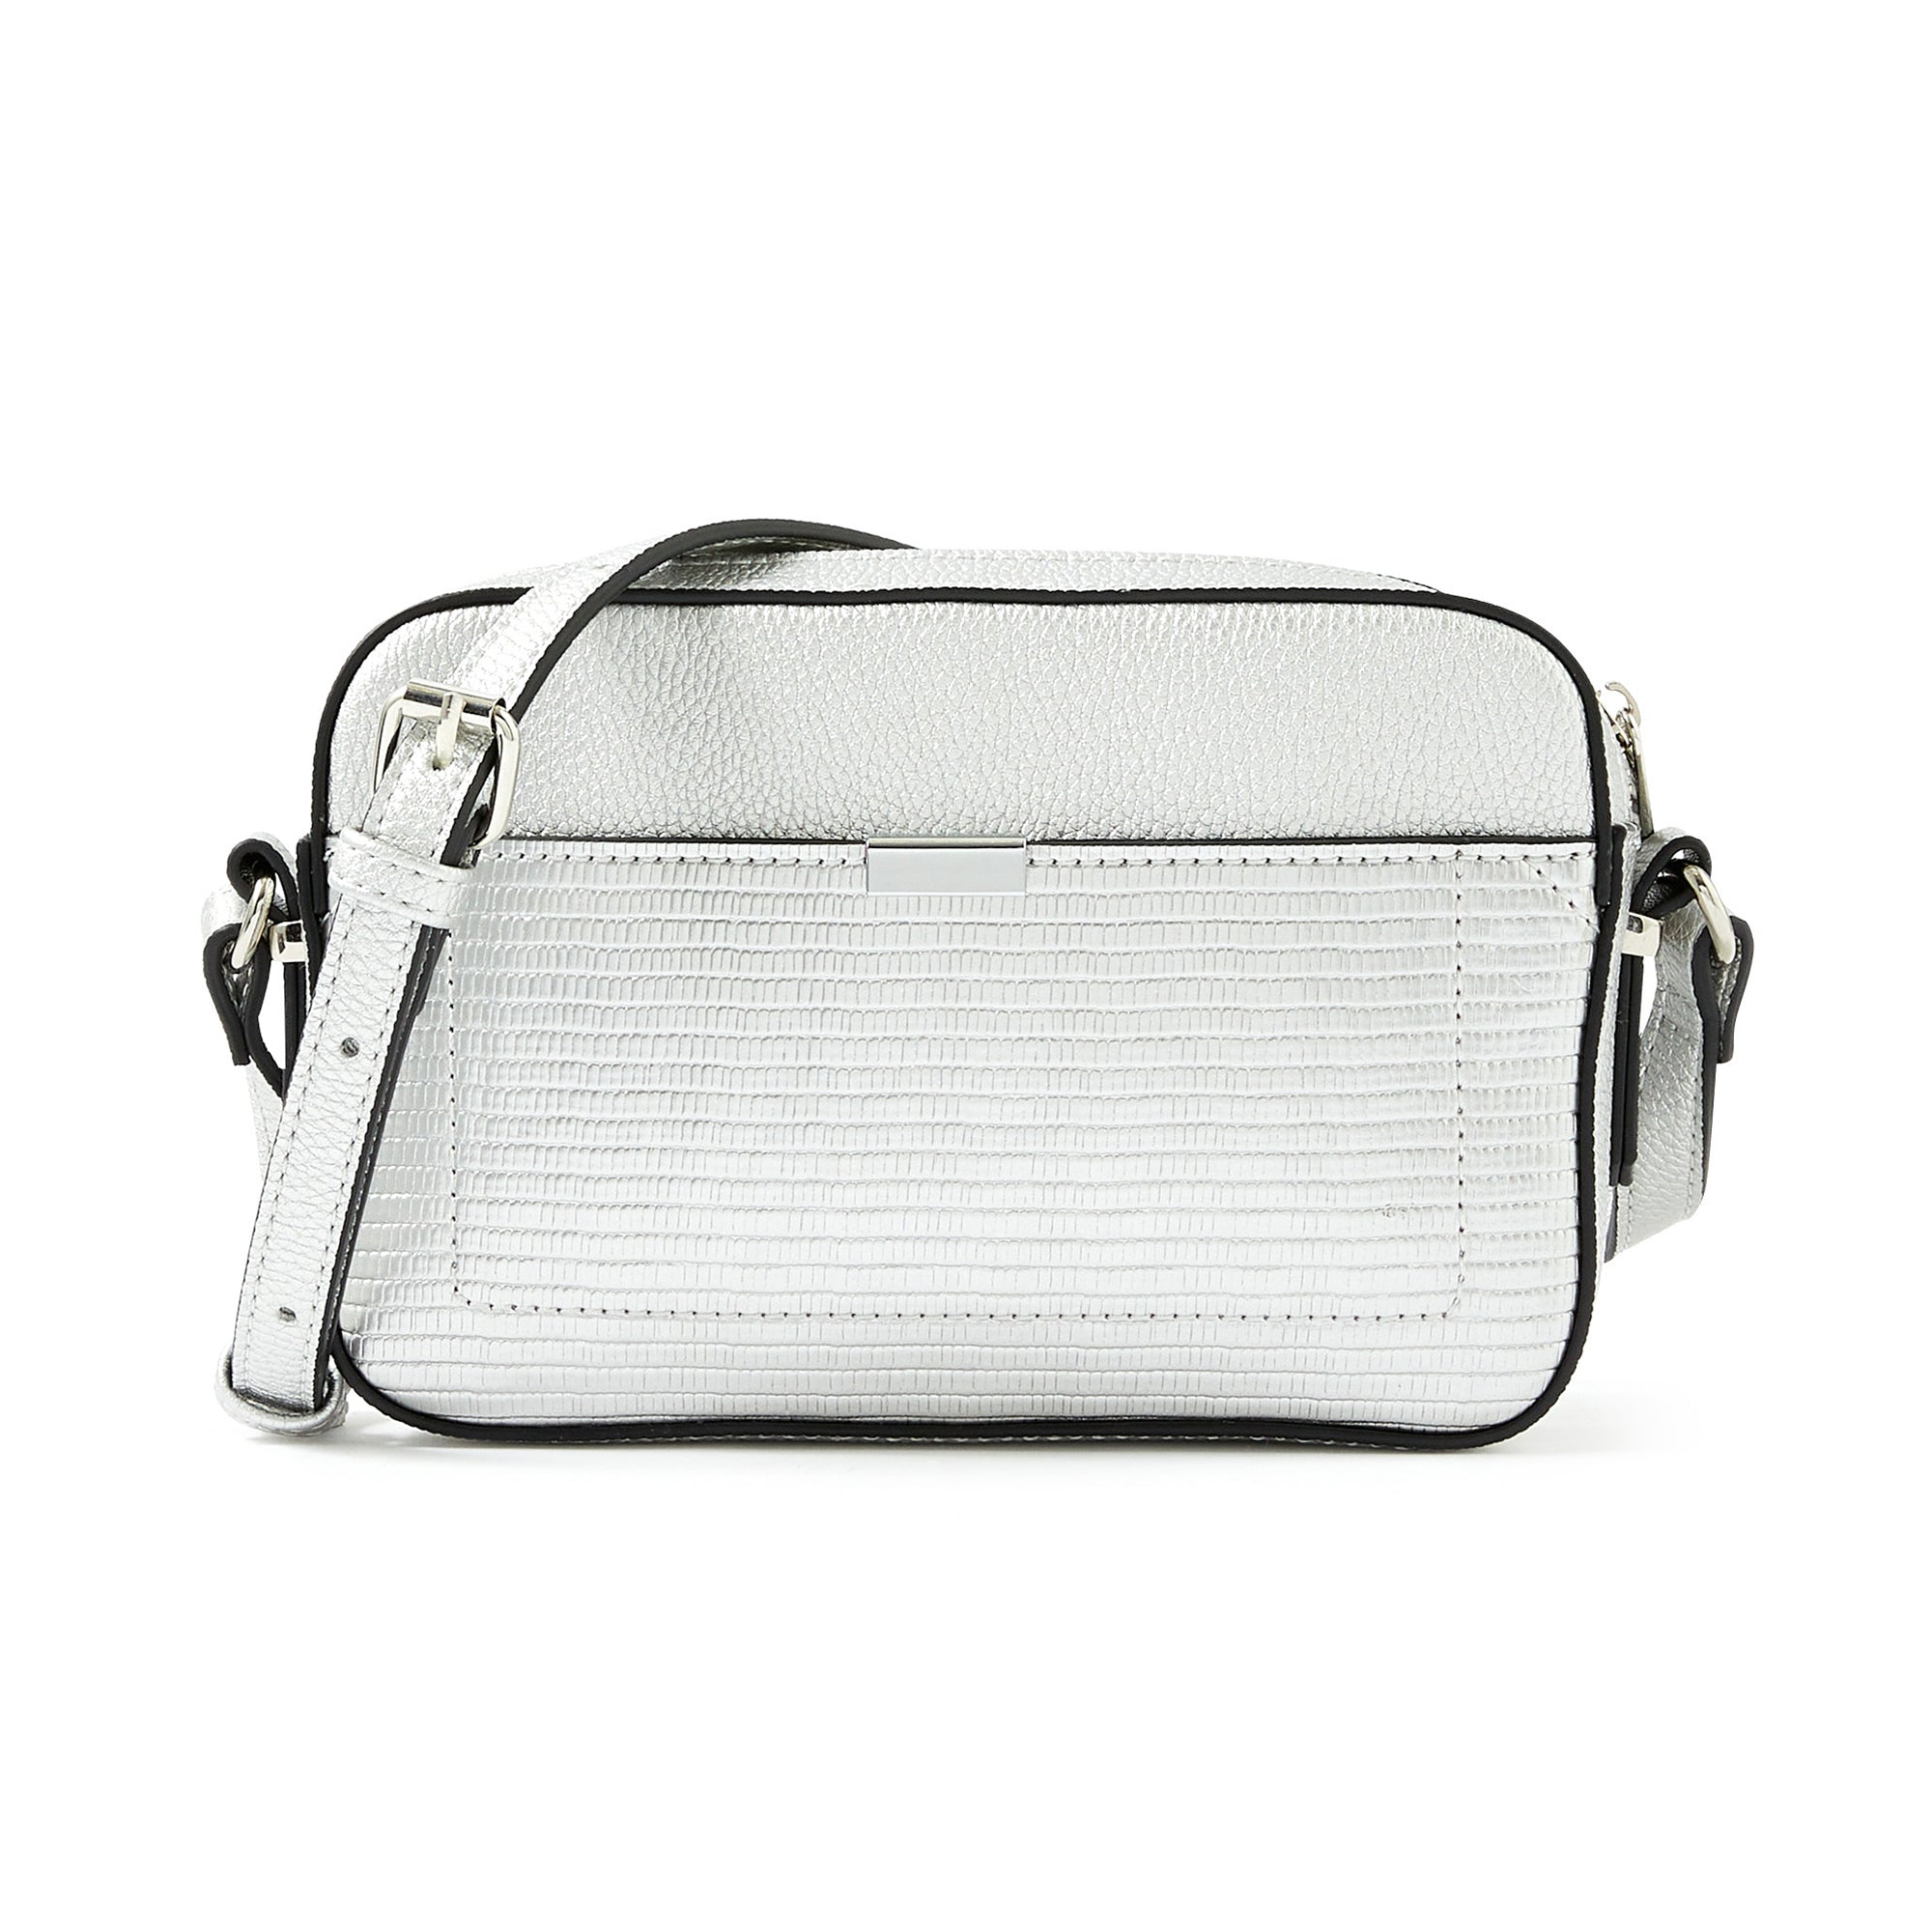 Accessorize London women's Faux Leather Silver Piper Sling bag